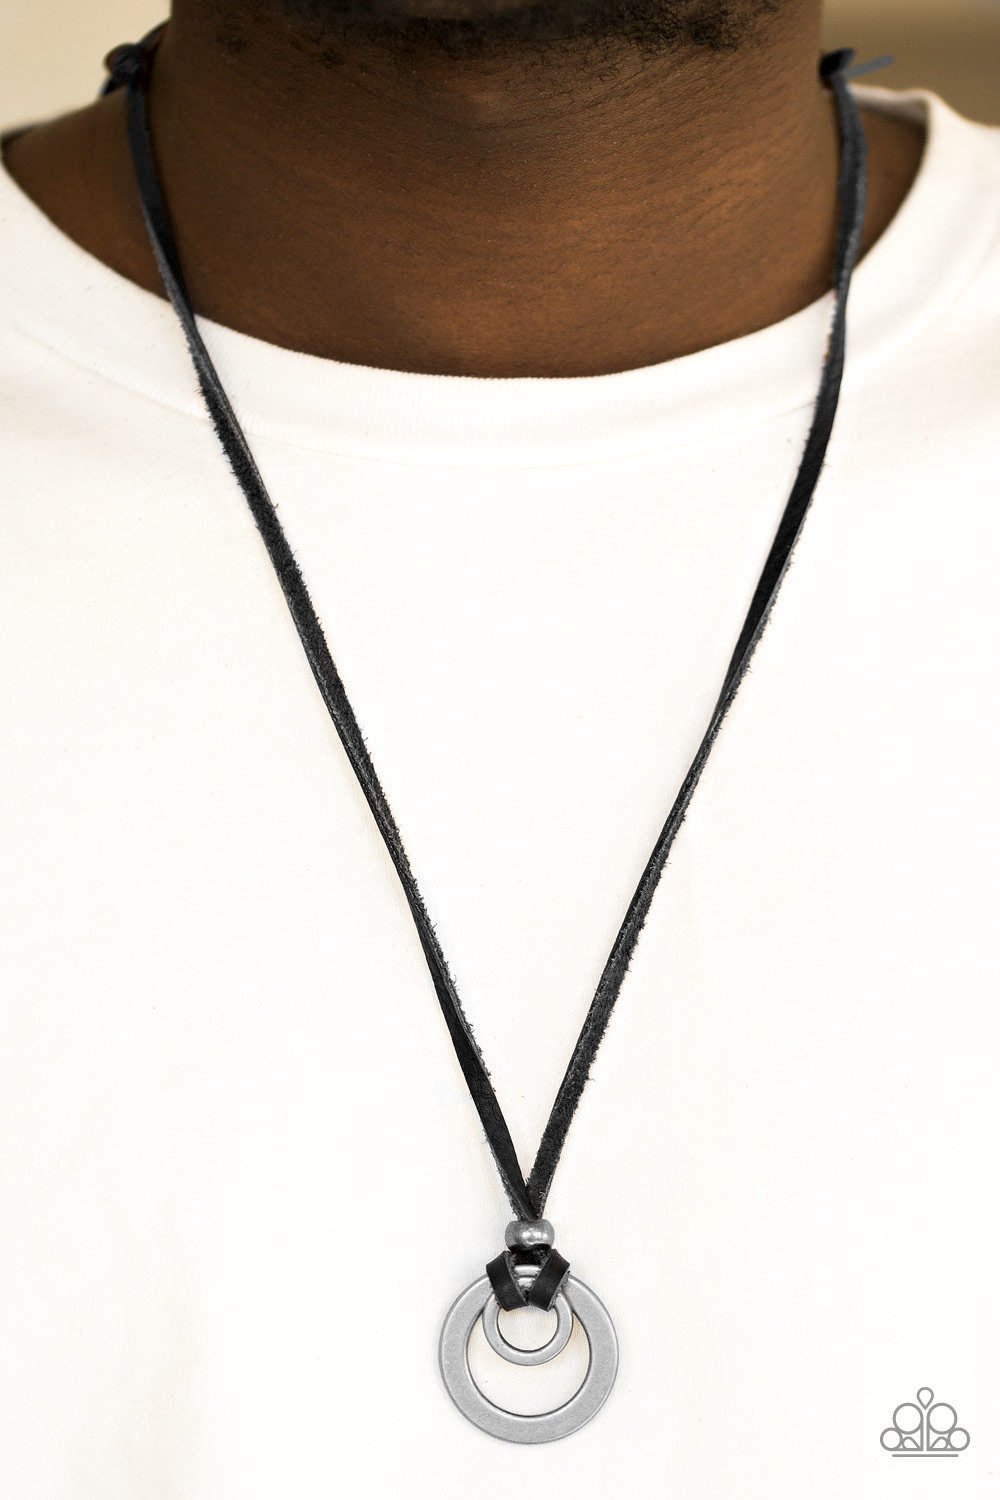 Get To High Ground - black - Paparazzi necklace